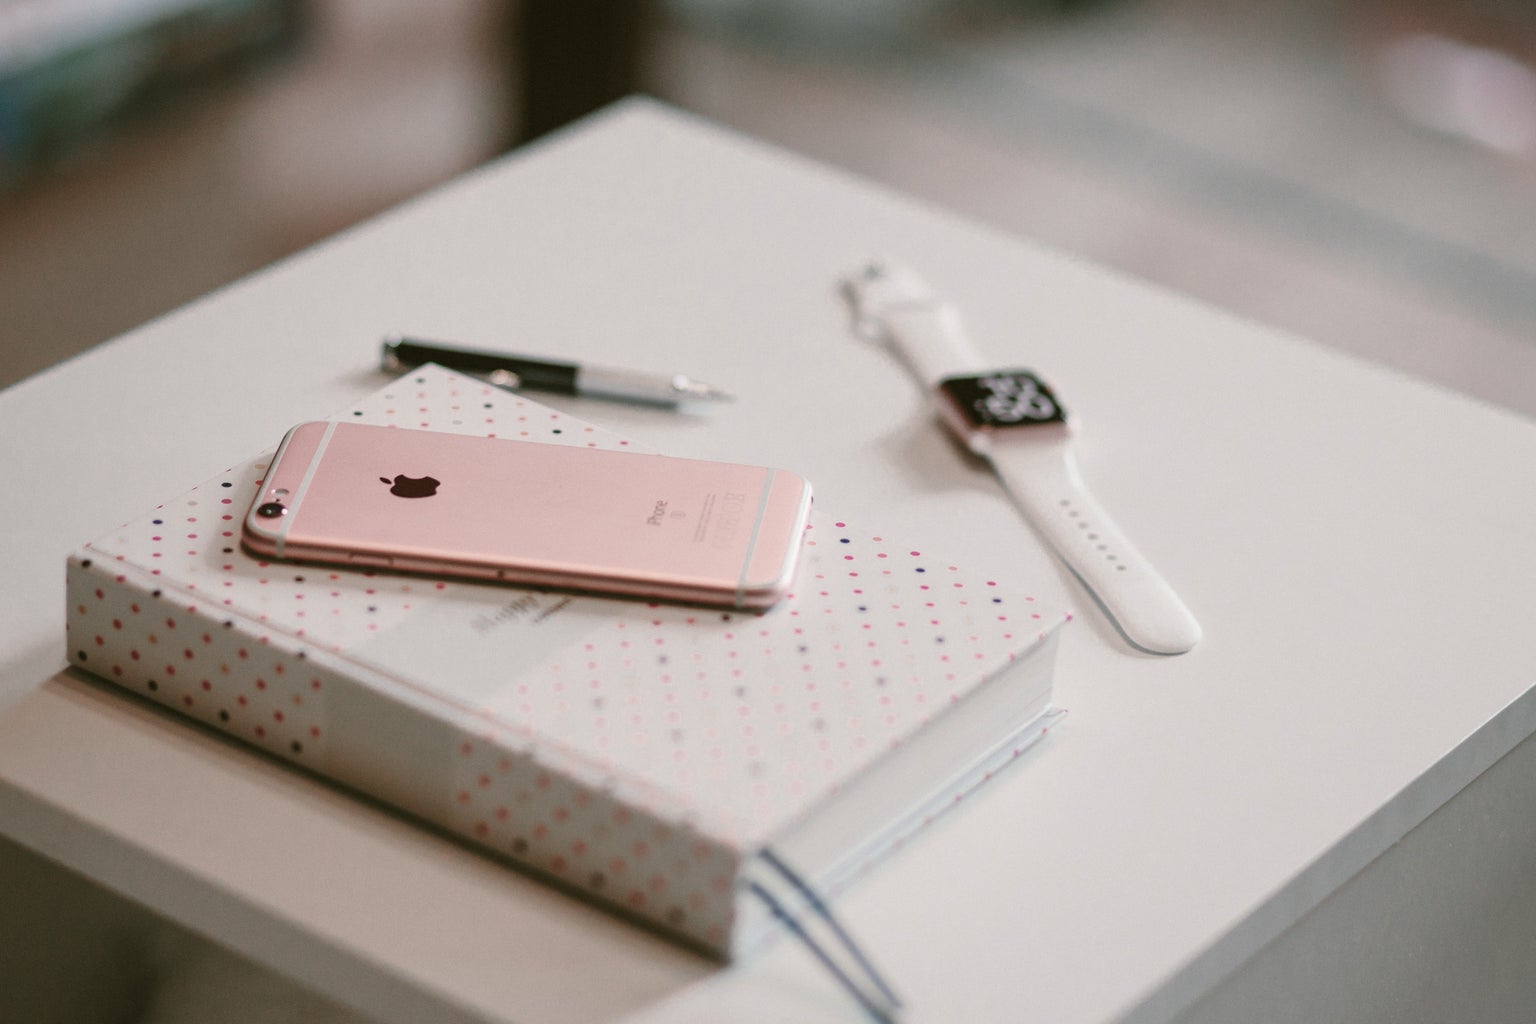 Rose gold smartphone on top of white white covered book with smartwatch